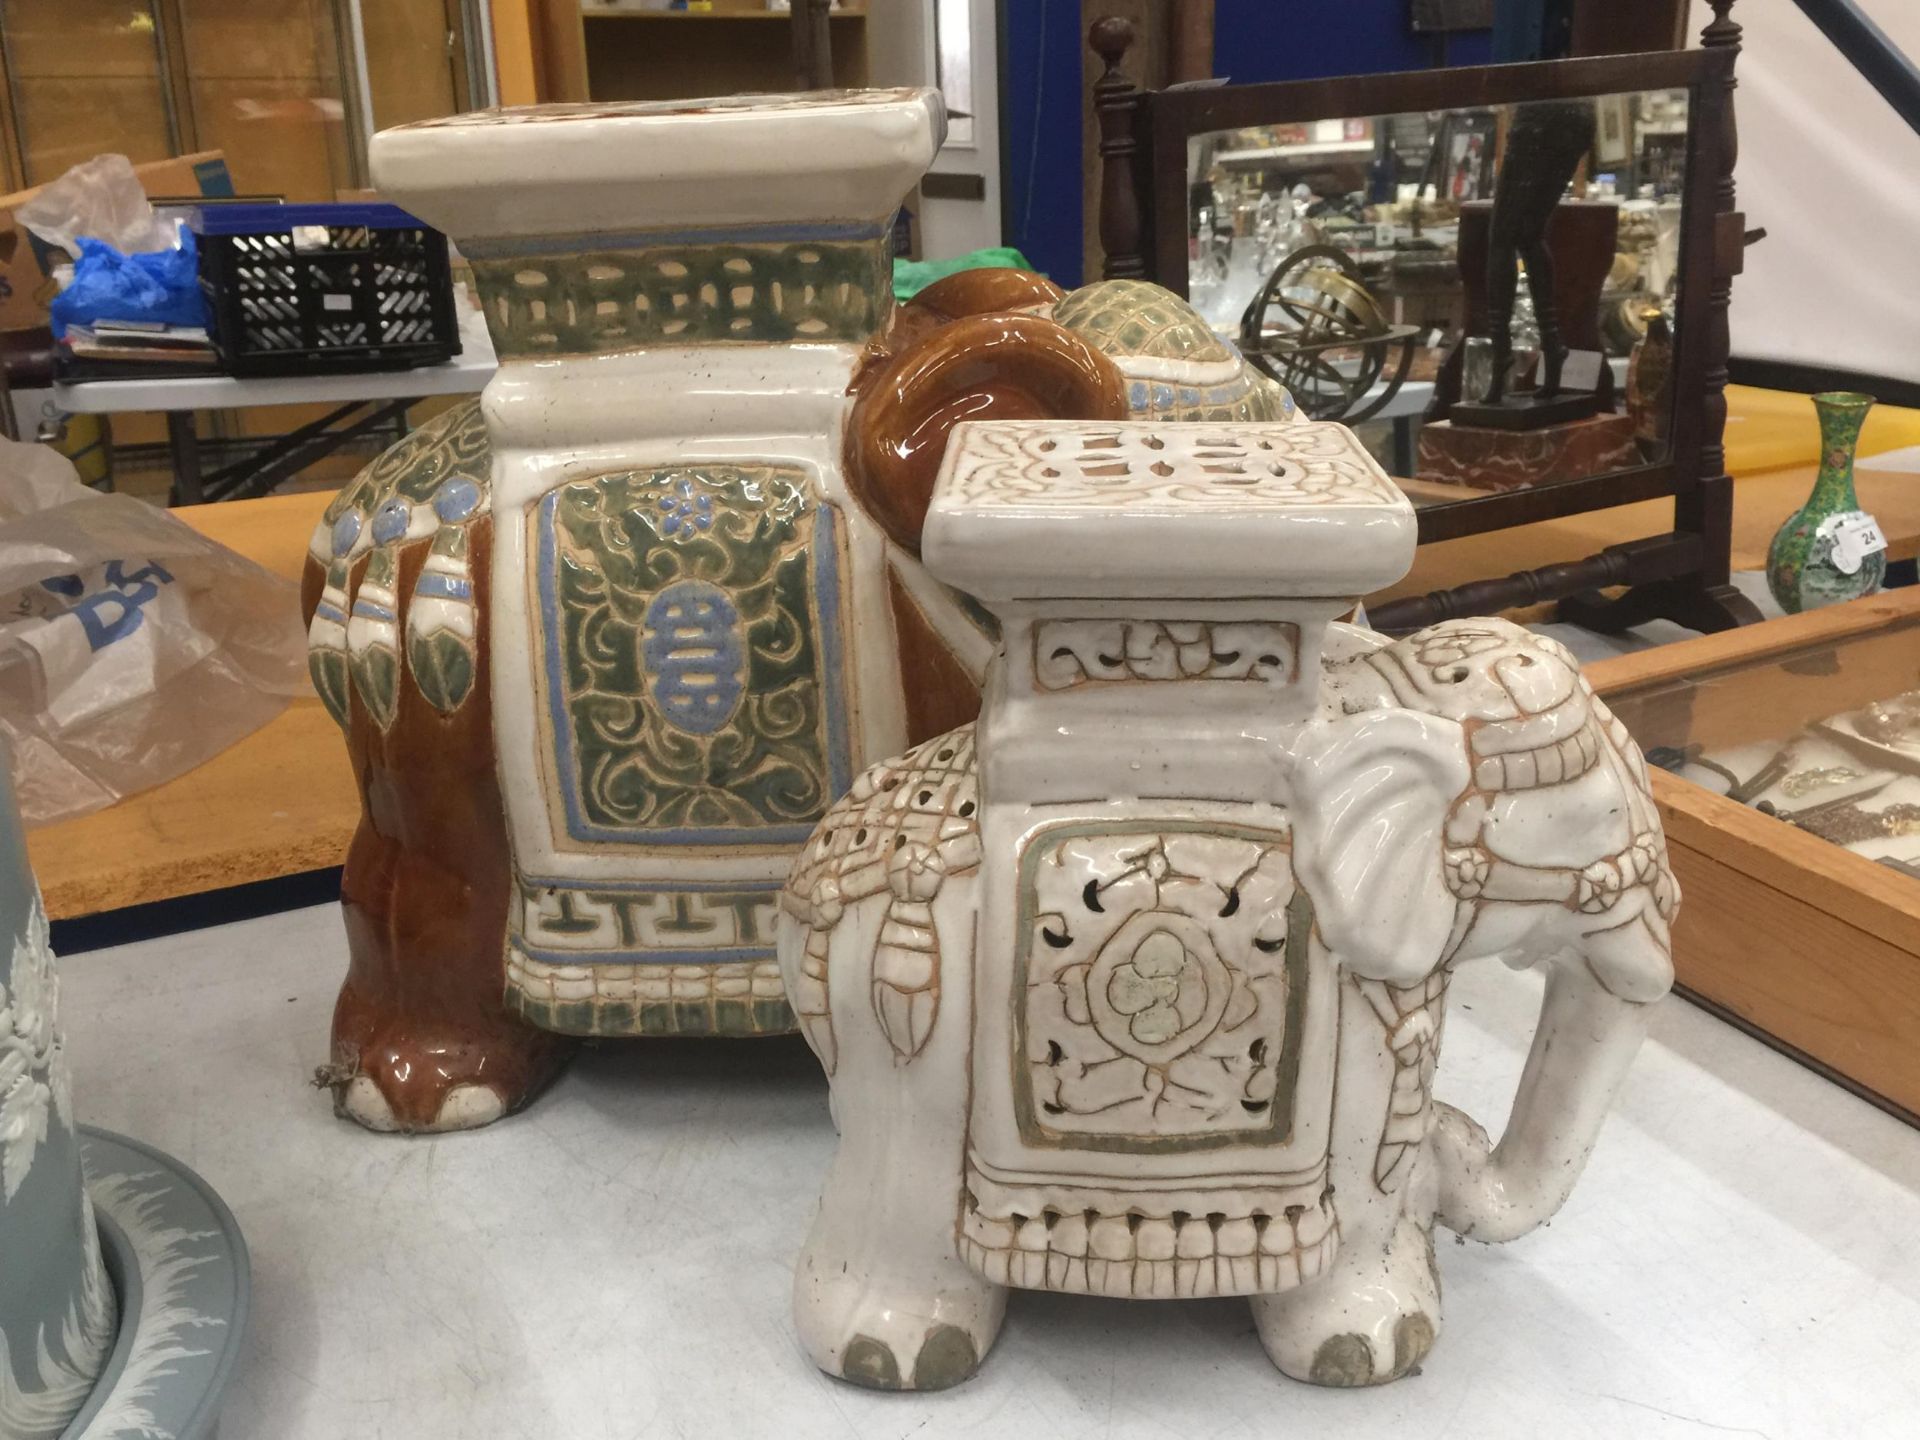 TWO LARGE CERAMIC ELEPHANT PLANT STANDS/SEATS - Image 2 of 5